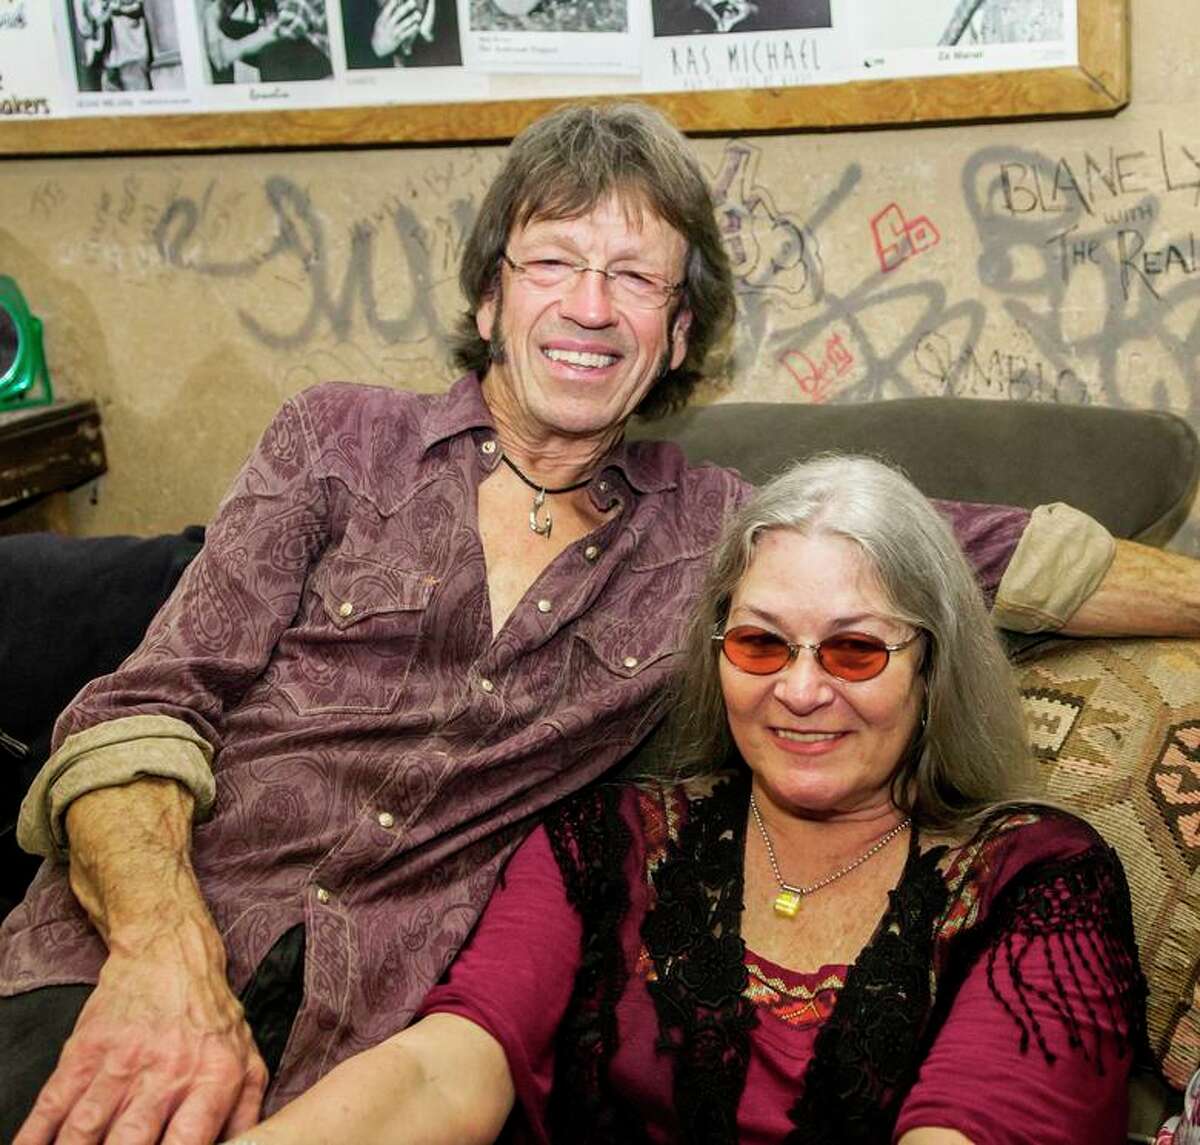 Pat Campbell visits with former Grateful Dead backup singer Donna Godchaux at the Ashkenaz in Berkeley in August 2012.